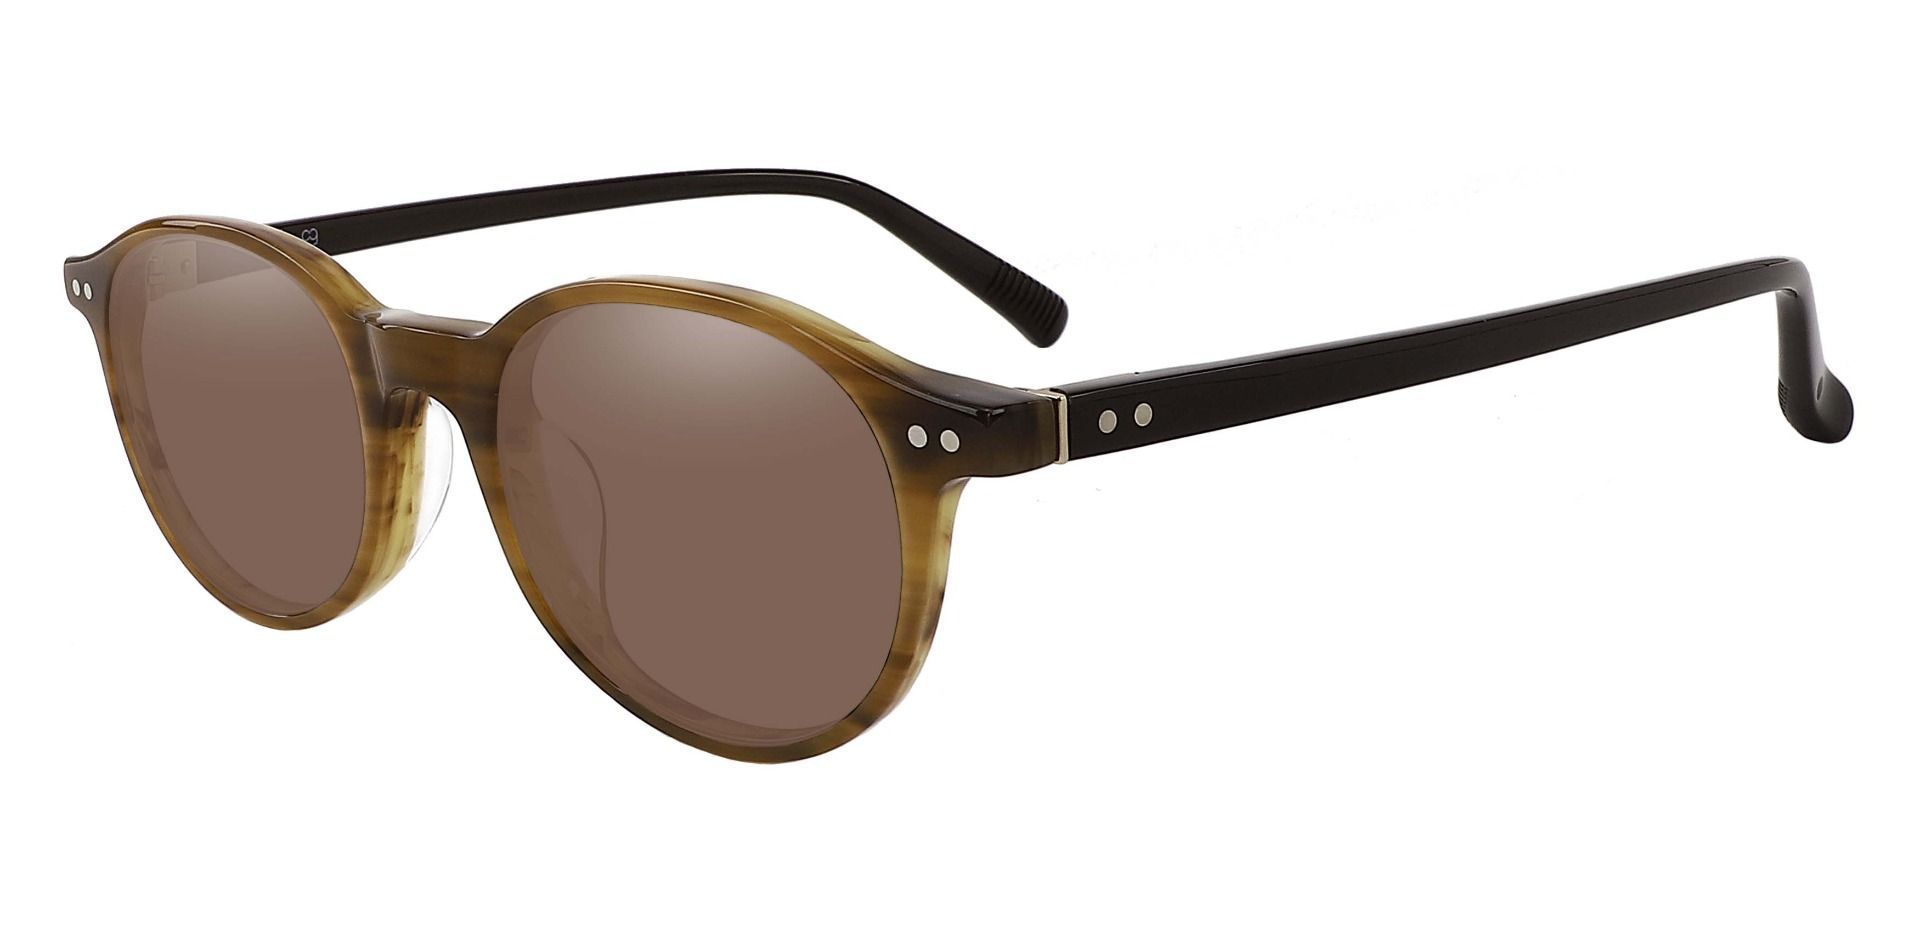 Avon Oval Non-Rx Sunglasses - Brown Frame With Brown Lenses